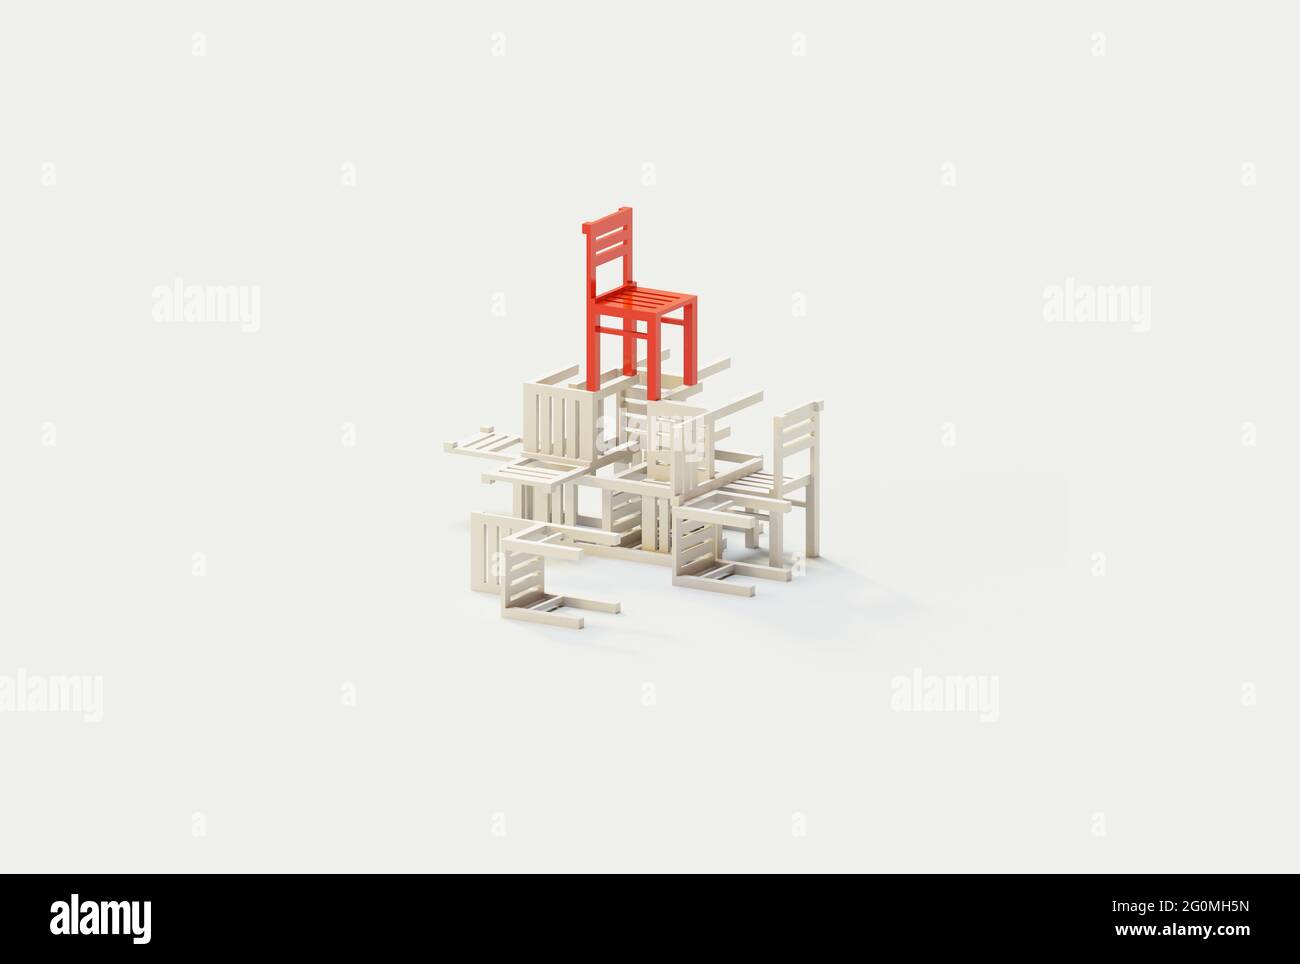 White chairs fallen with red chair standing on top of it. 3D illustration of triumph competition and winning Stock Photo